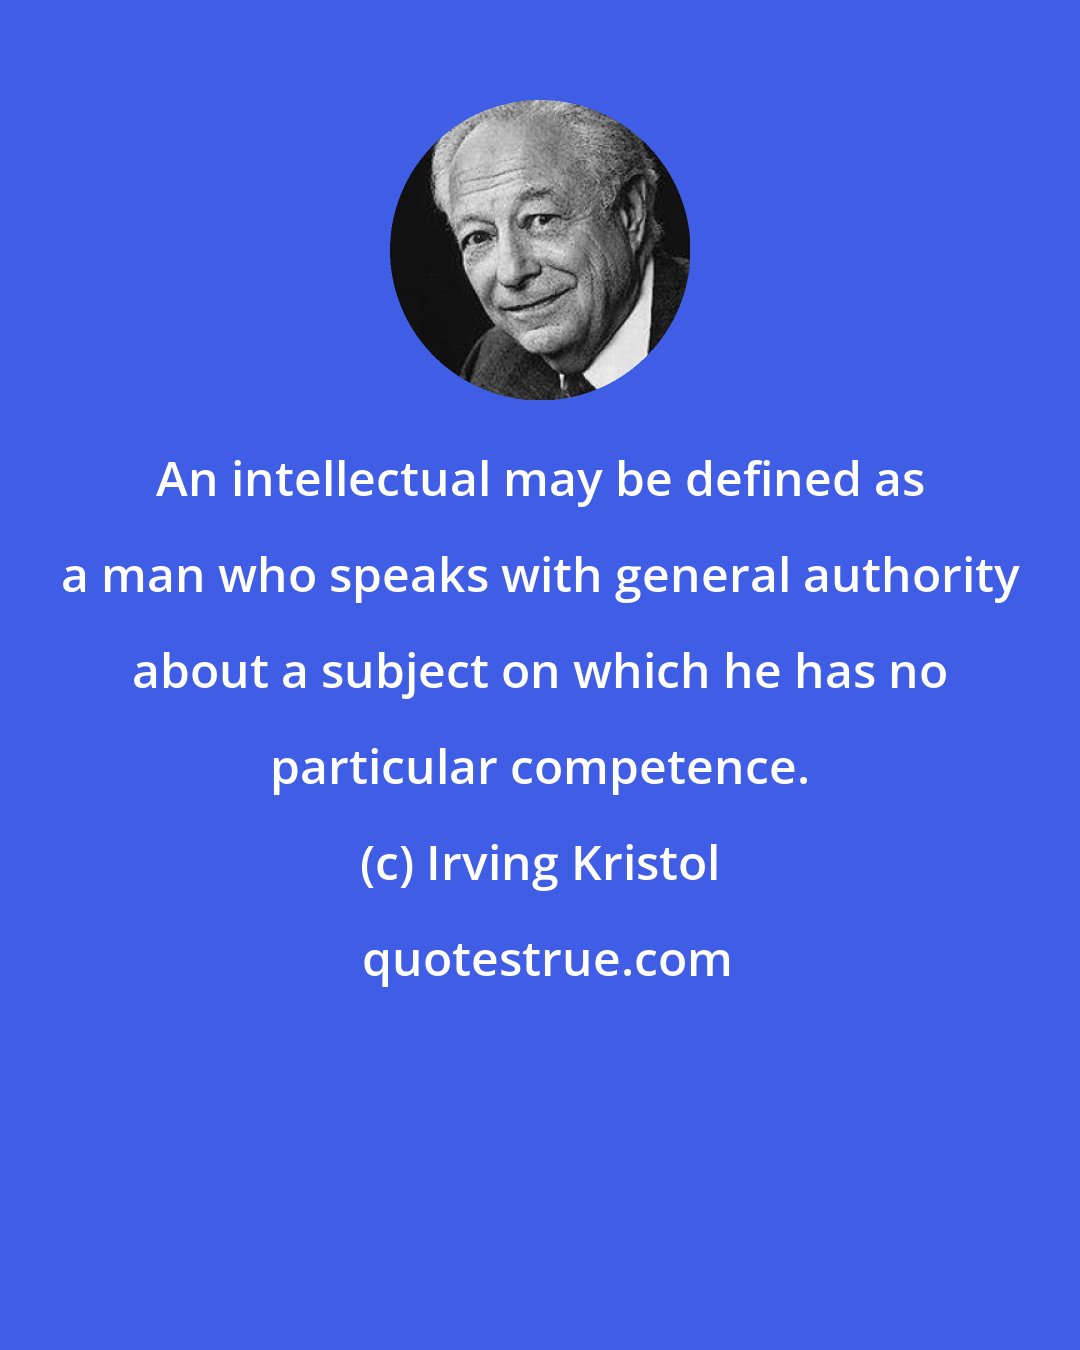 Irving Kristol: An intellectual may be defined as a man who speaks with general authority about a subject on which he has no particular competence.